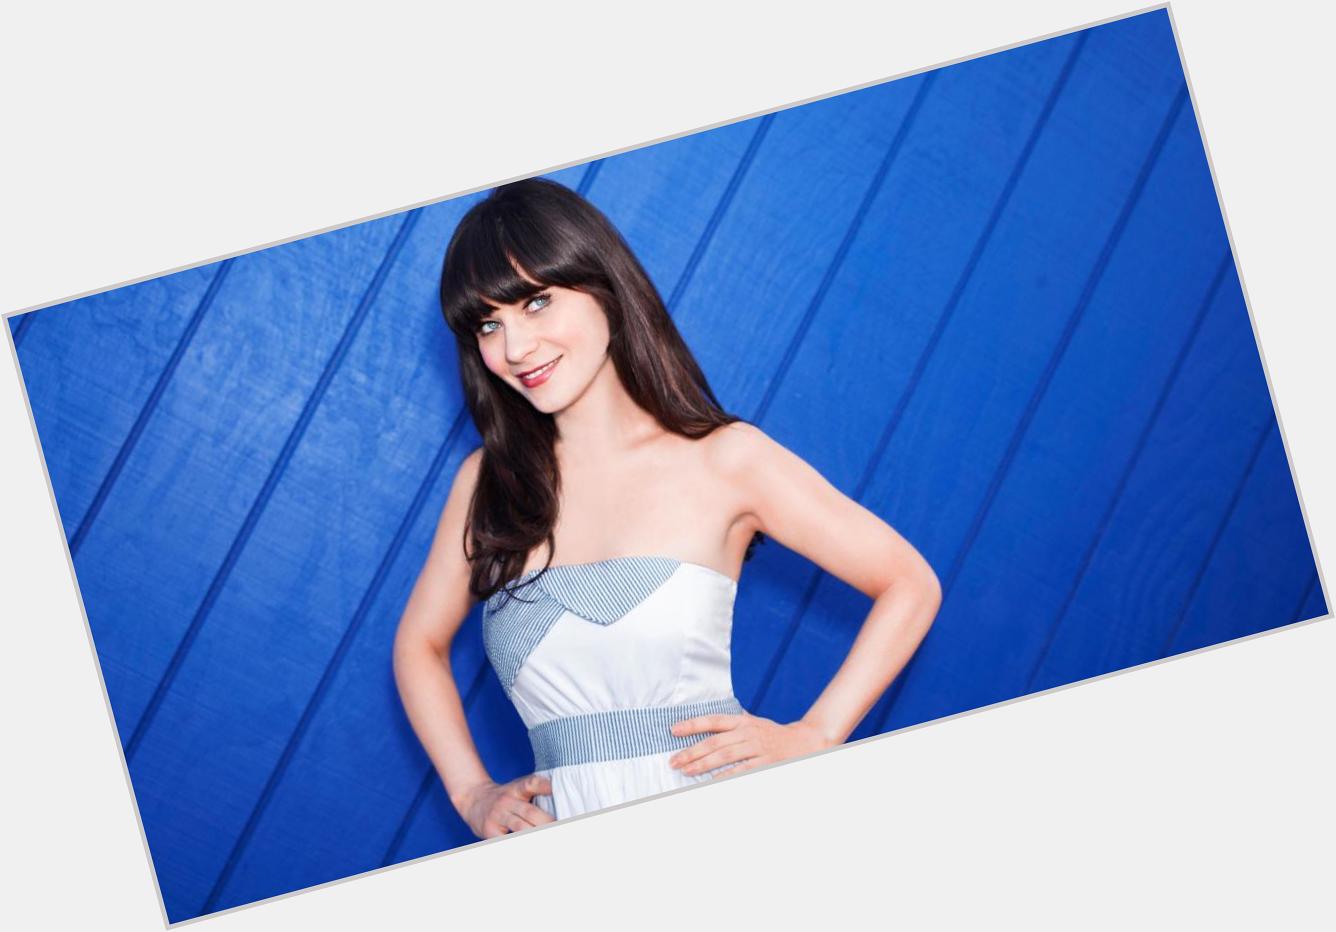 Check Out These 14 Amazing Photos of Zooey Deschanel  